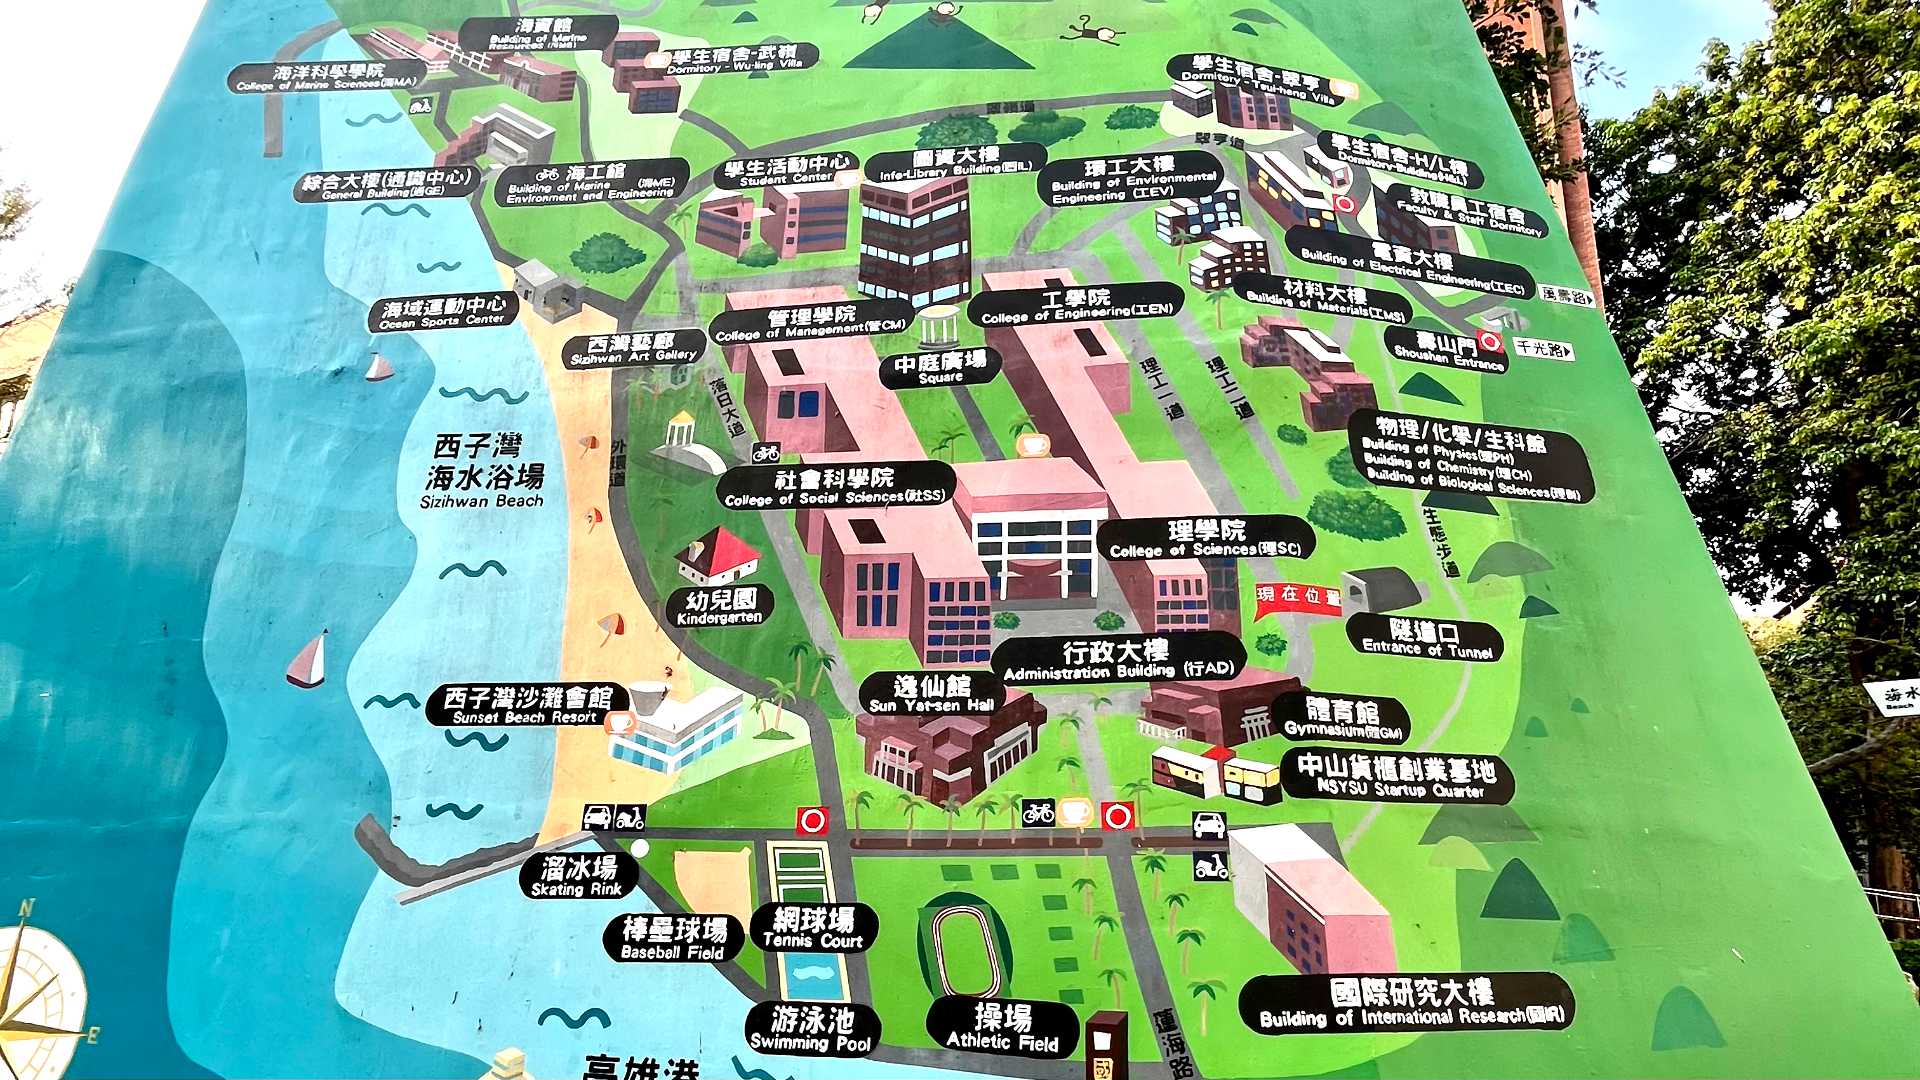 A cartoon-style map of the National Sun Yat-sen University campus painted on a wall.